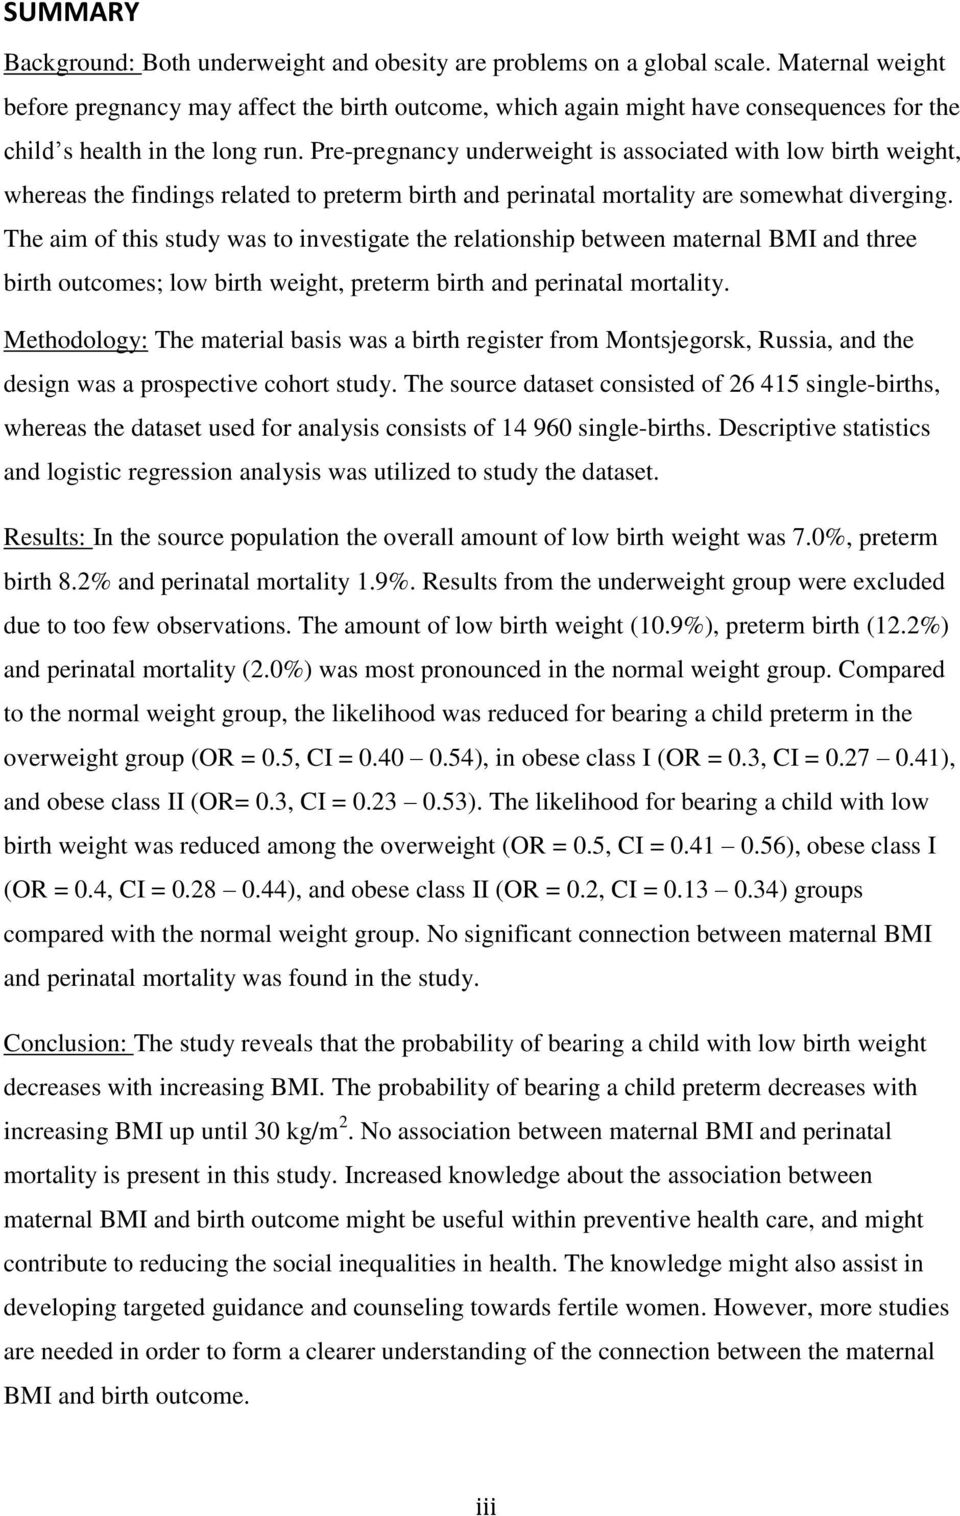 Pre-pregnancy underweight is associated with low birth weight, whereas the findings related to preterm birth and perinatal mortality are somewhat diverging.